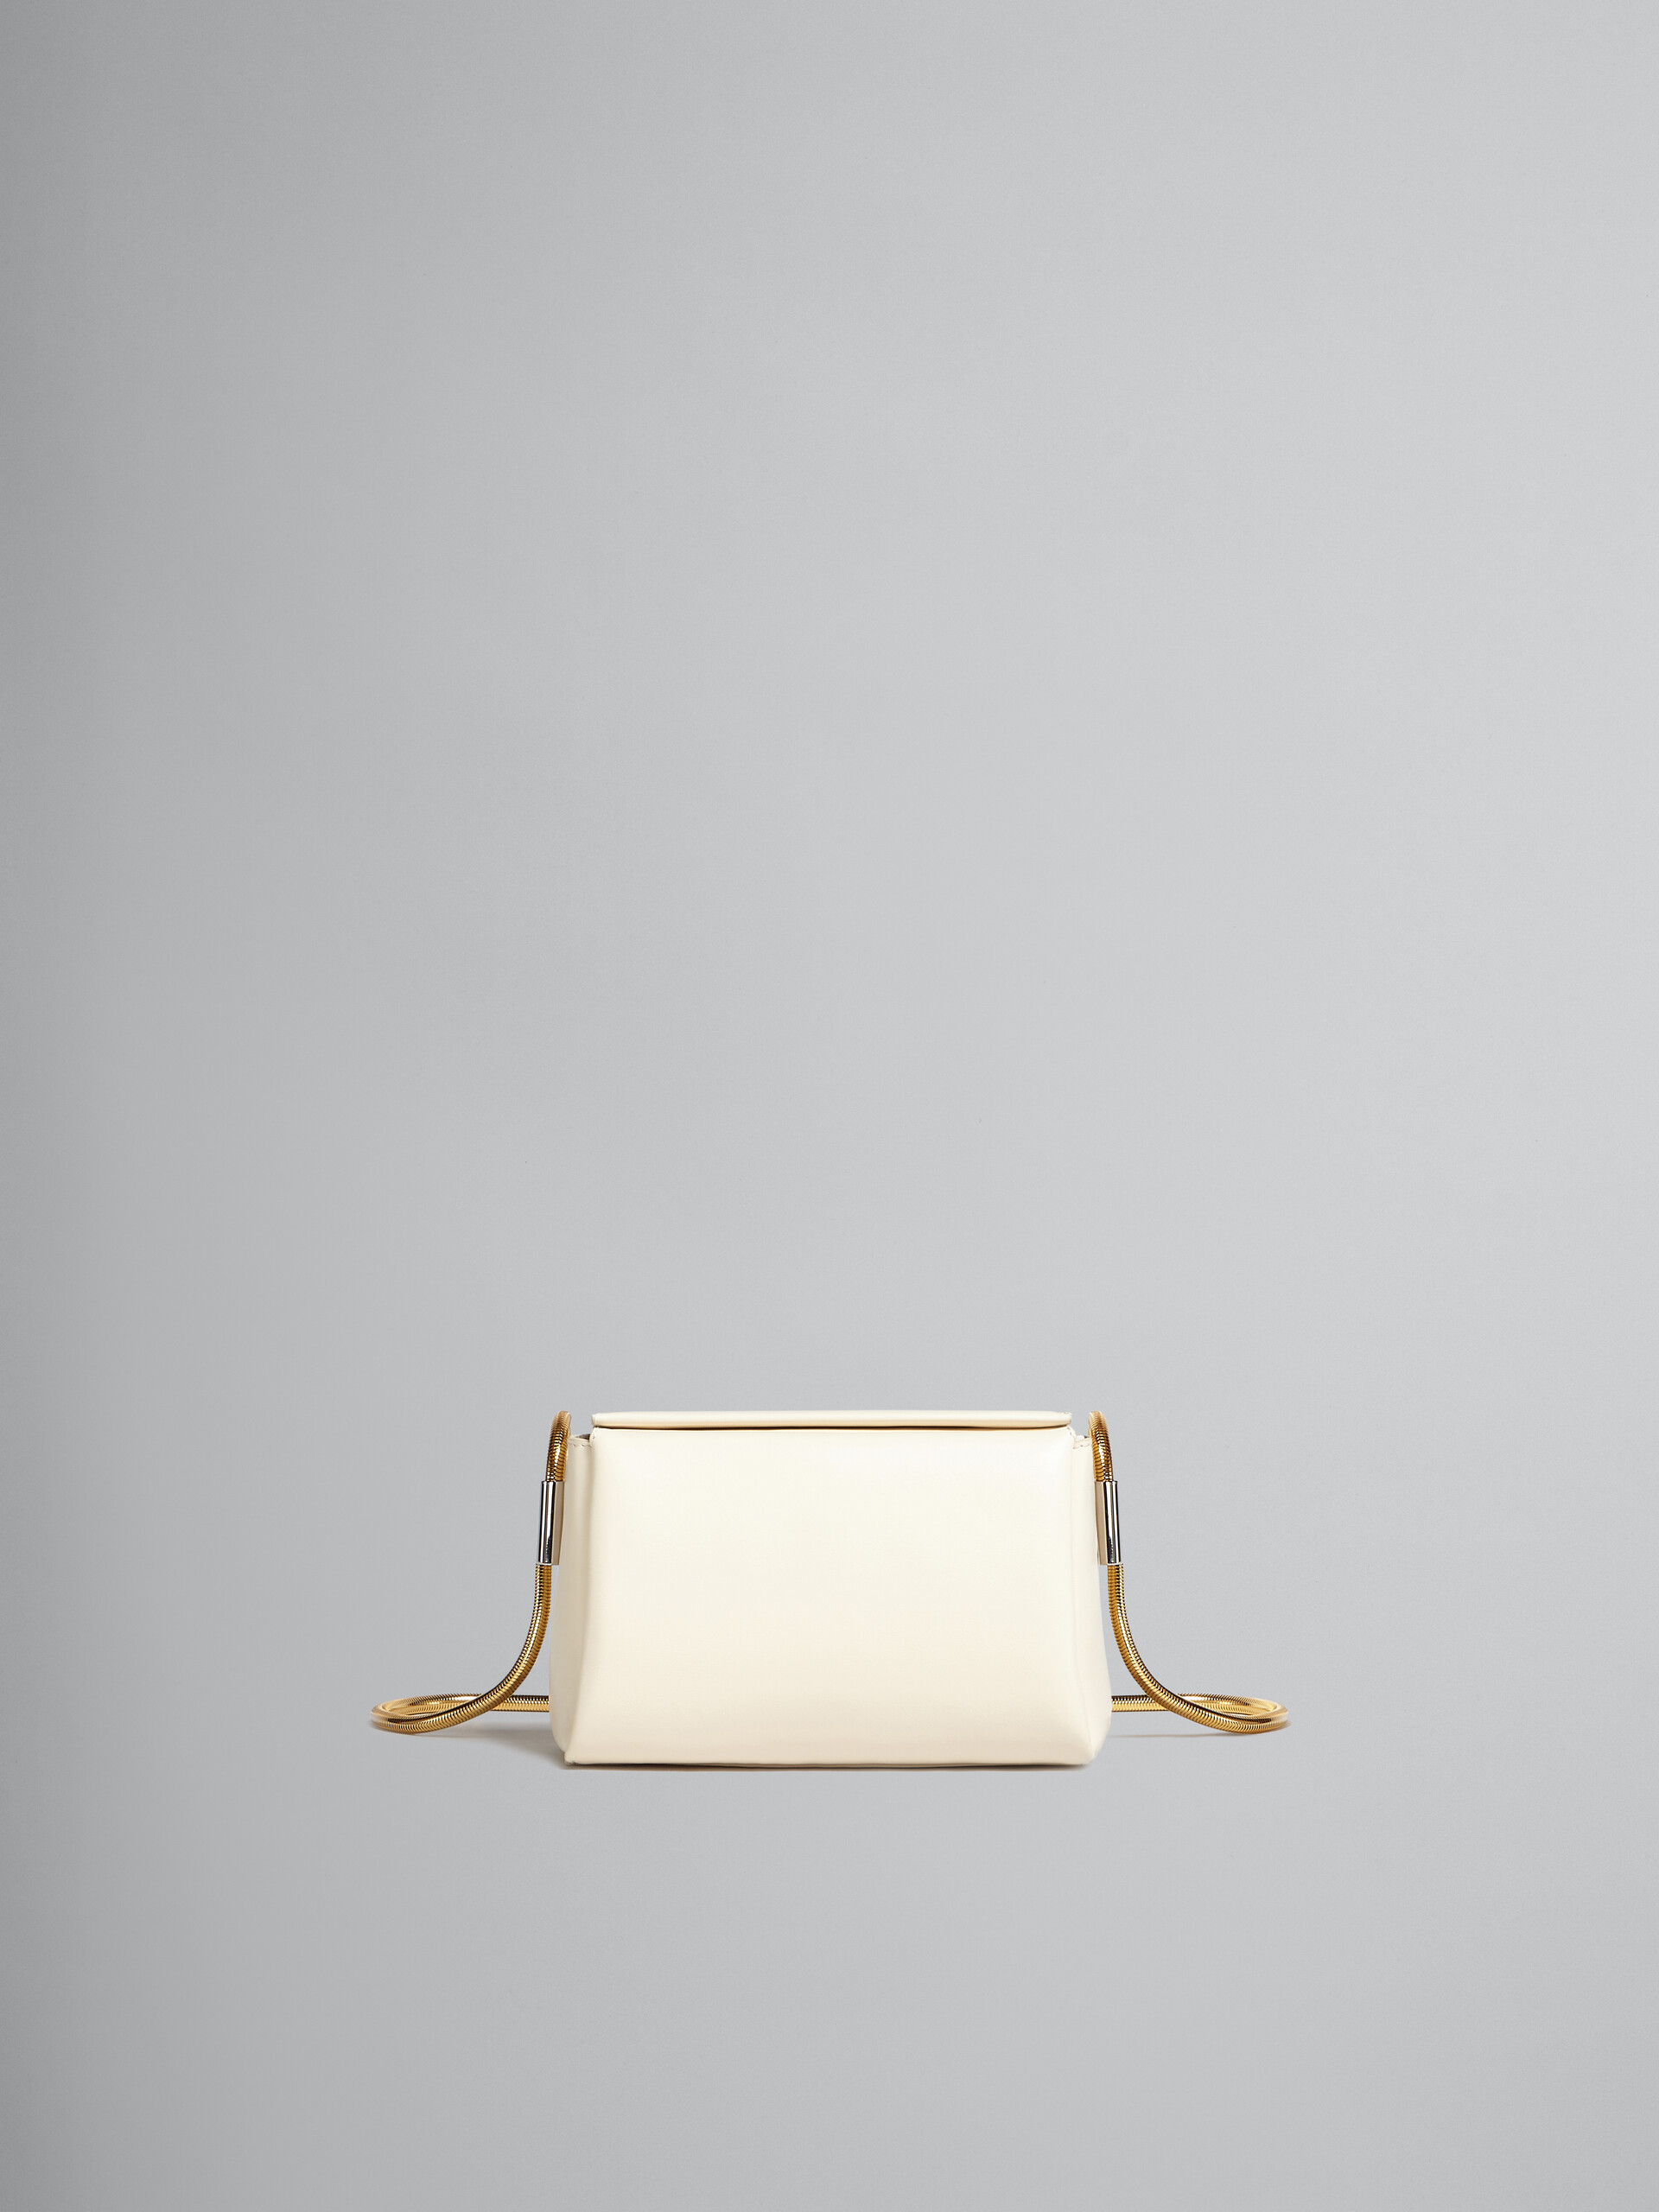 Toggle Small Bag in ivory white leather - Shoulder Bag - Image 1